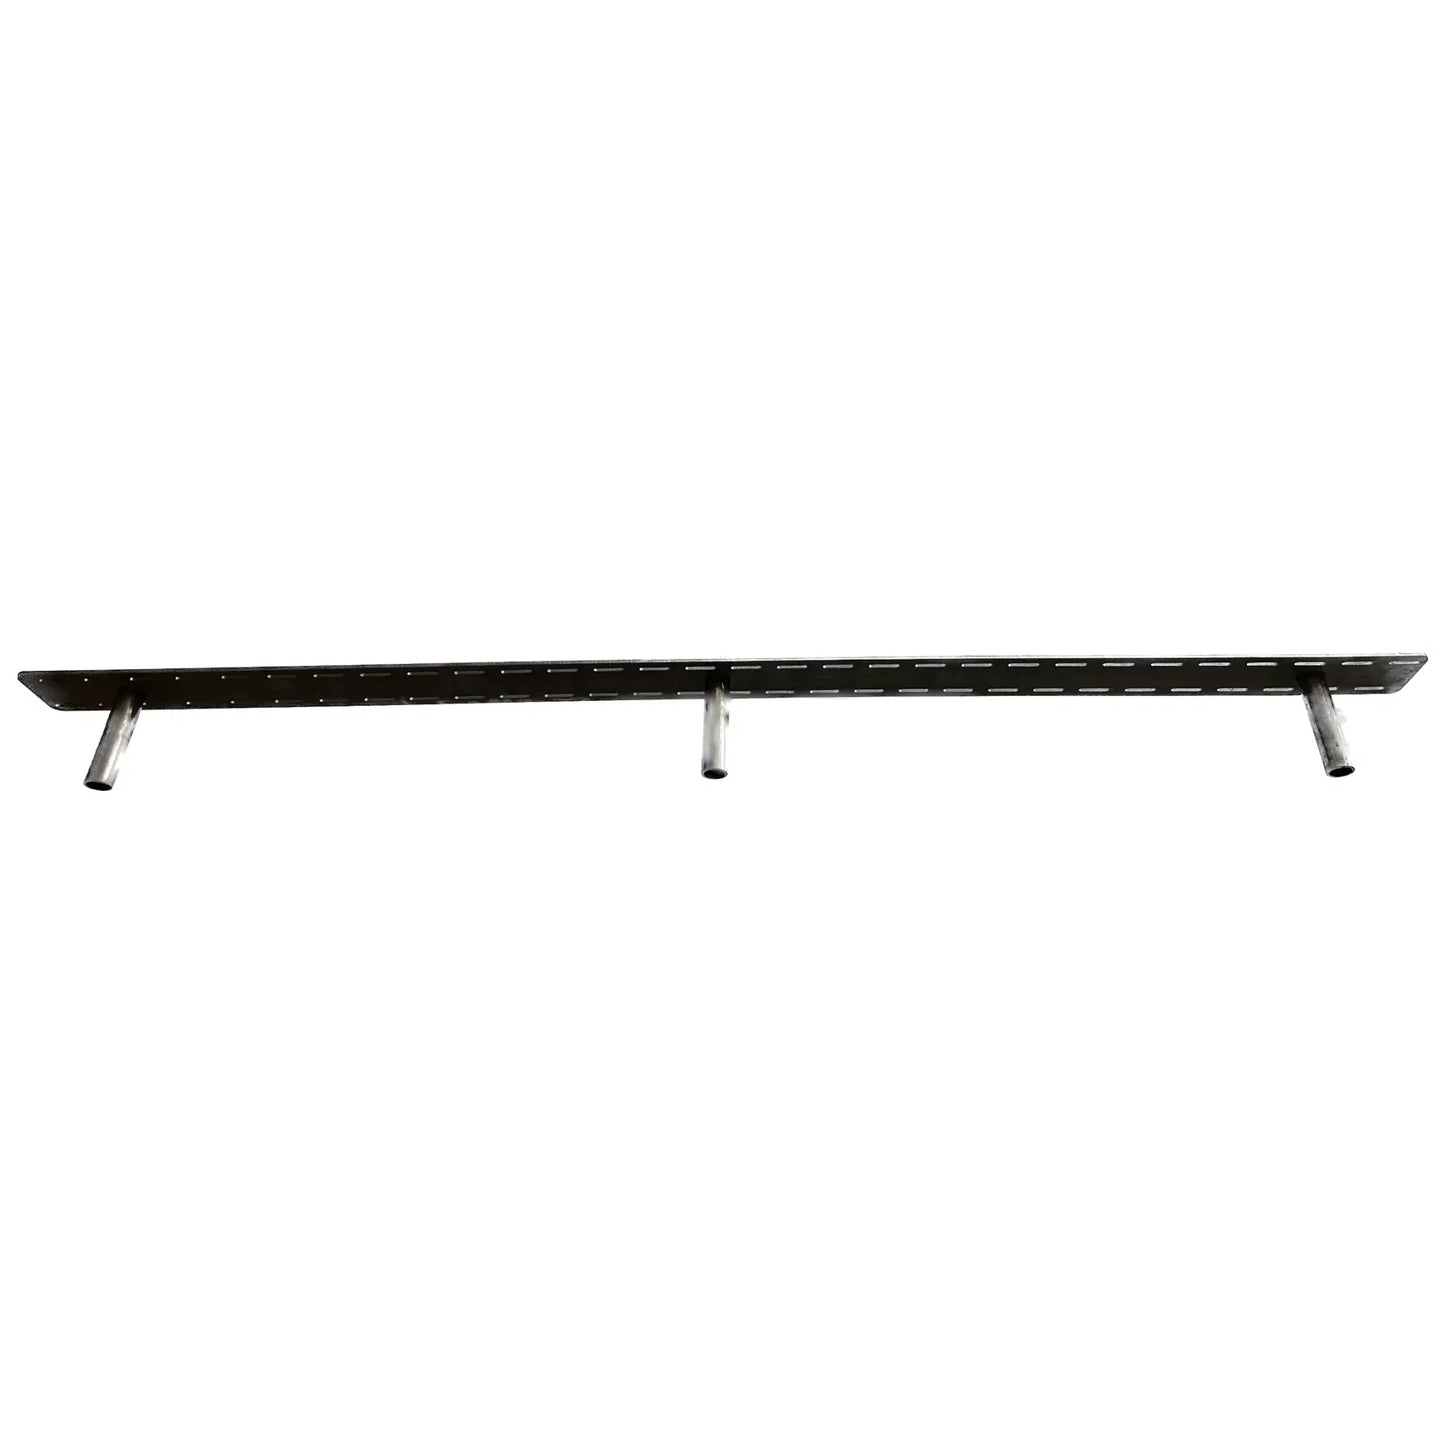 steel floating bracket shown top view with a plate on the back and slots for screws around the perimeter of the plate. Three rods extend out from the plate that will go into the mantel or shelf for mounting.